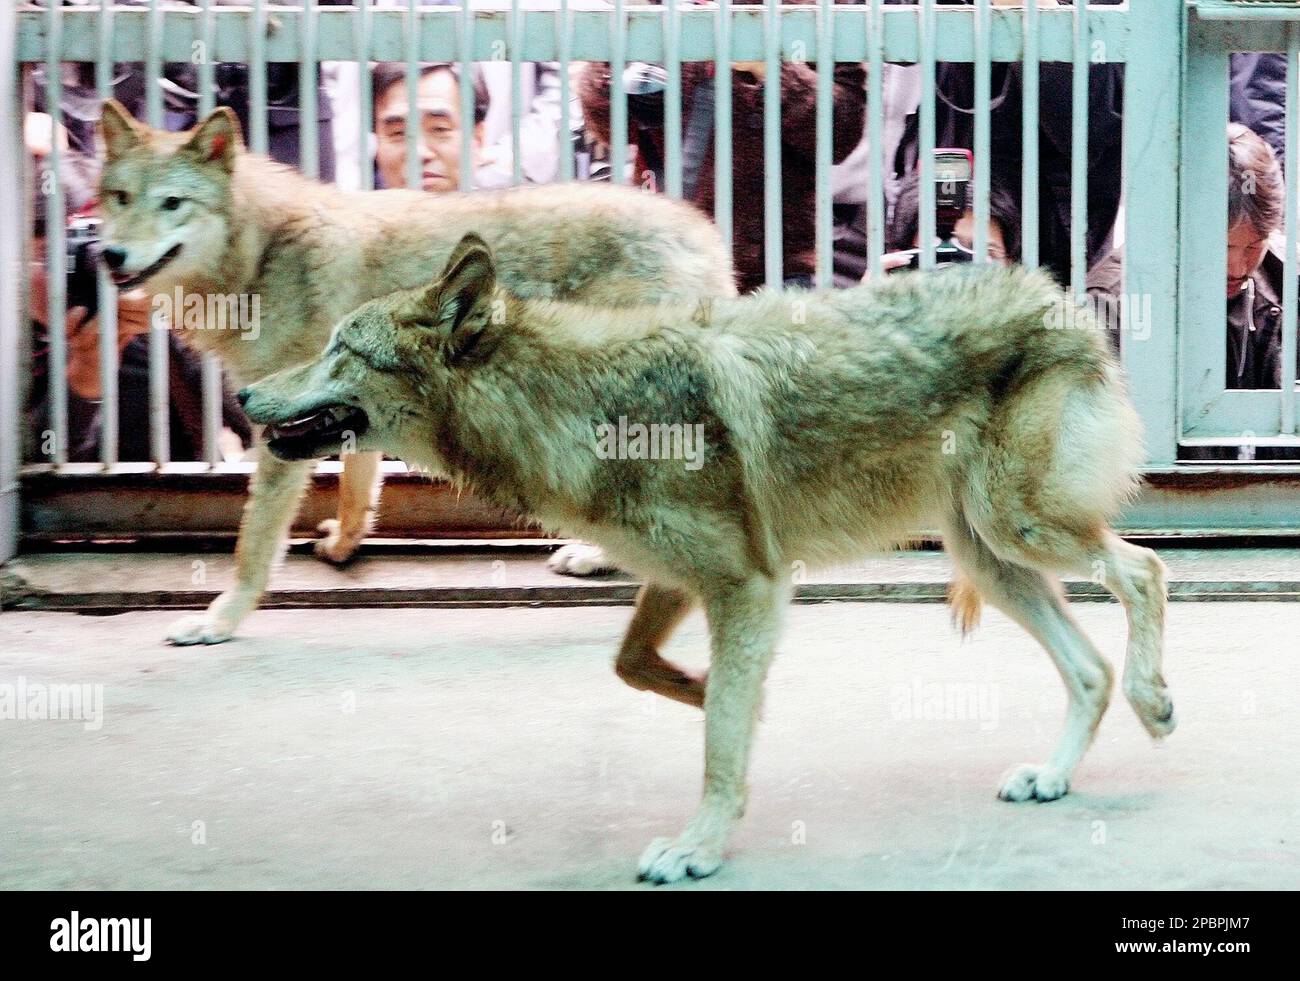 Two female cloned wolves named Snuwolf, left, and Snuwolffy, right, are seen at the Seoul Zoo in Gwacheon, south of Seoul, South Korea, Monday, March 26, 2007. A former collaborator of disgraced South Korean scientist Hwang Woo-suk claimed Monday to have succeeded in cloning two wolves. The two wolves _ endangered species _ were born Oct. 18 and 26 in 2005, said Lee Byeong-chun, a veterinary professor of Seoul National University, according to the university's office of research affairs. DNA tests showed the two wolves _ named Snuwolf and Snuwolffy _ are clones, the office said, adding the res Stock Photo